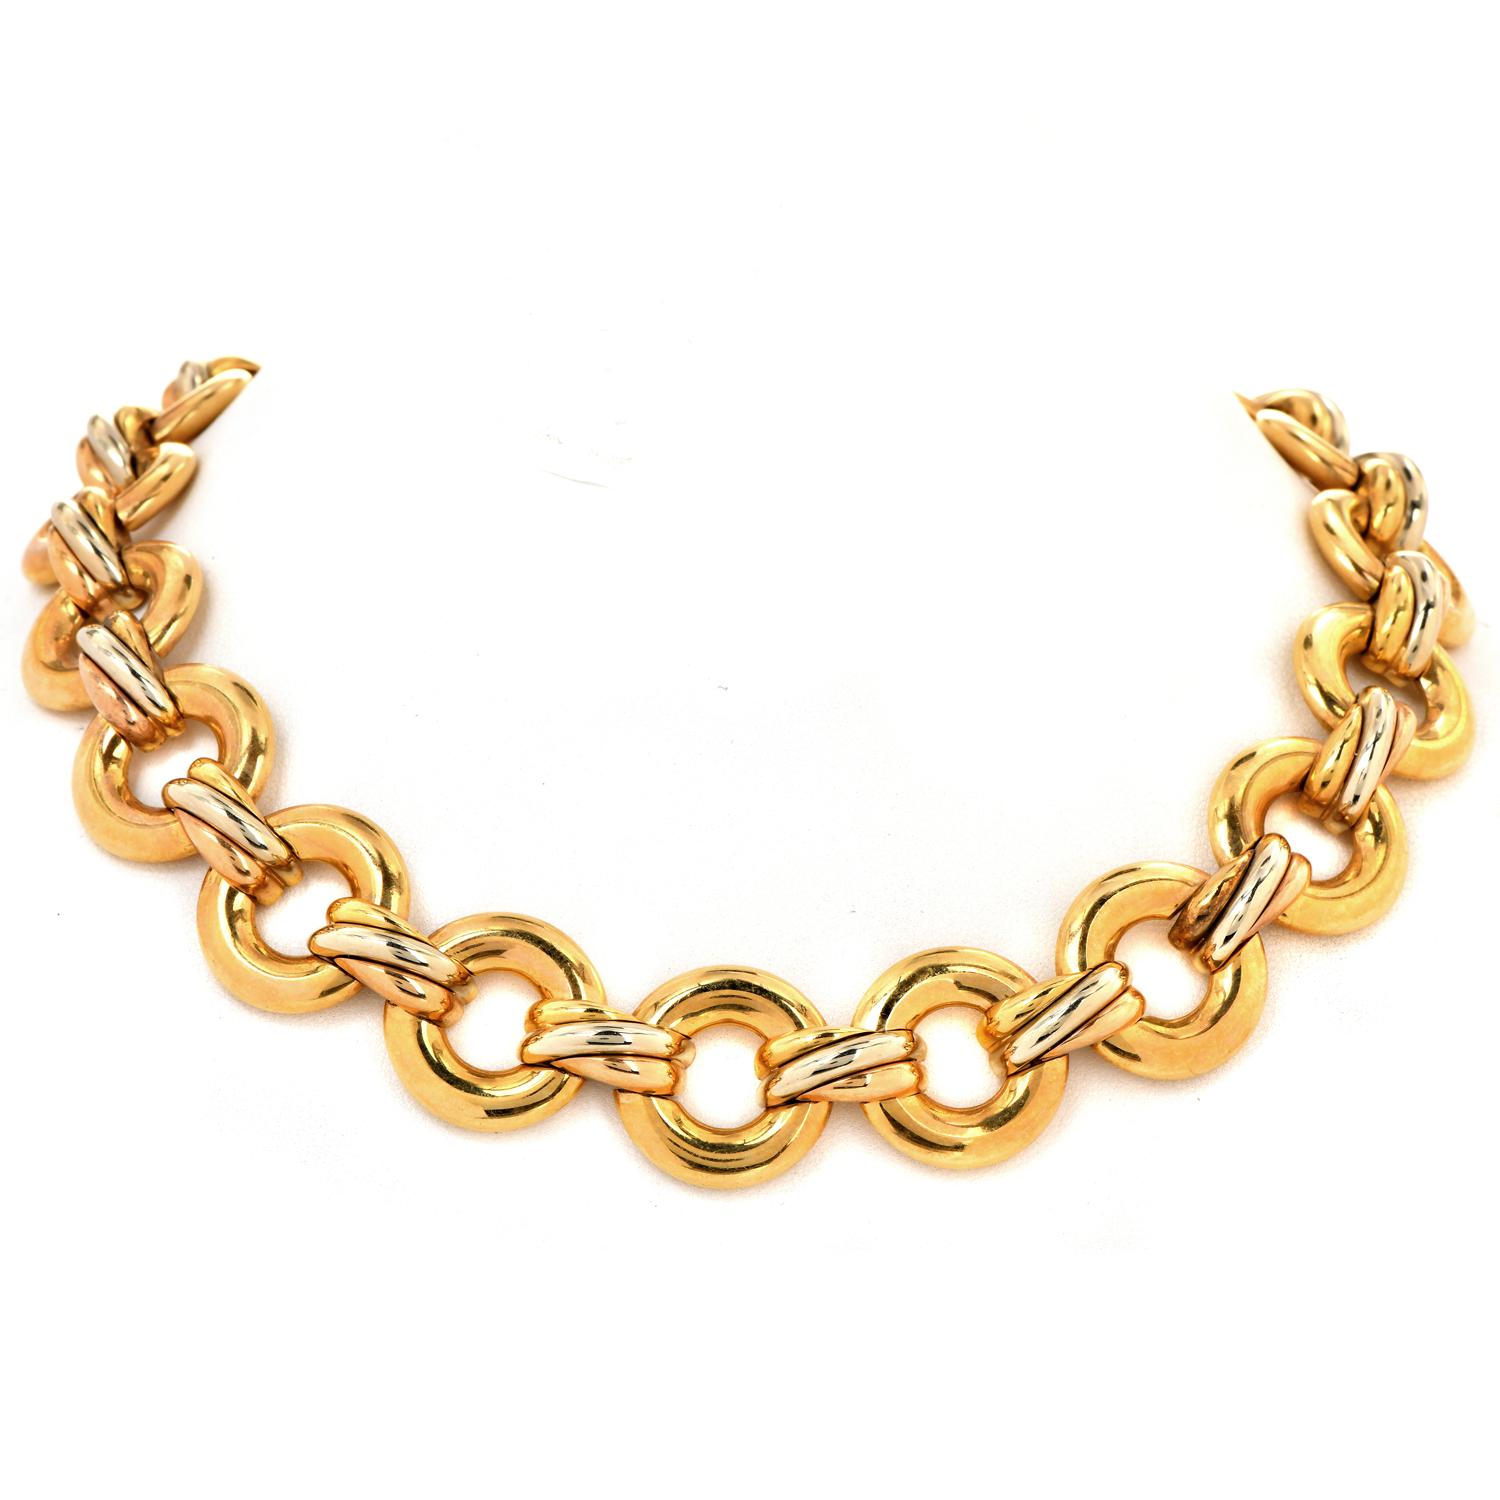 This Iconic Cartier Trinity 18k Multi Color Gold Circular Link choker Necklace In One of the most famous designs and it is made in yellow gold with a touch of white and pink gold Circa 1990s.

Cartier continues to be desired for its sophistication